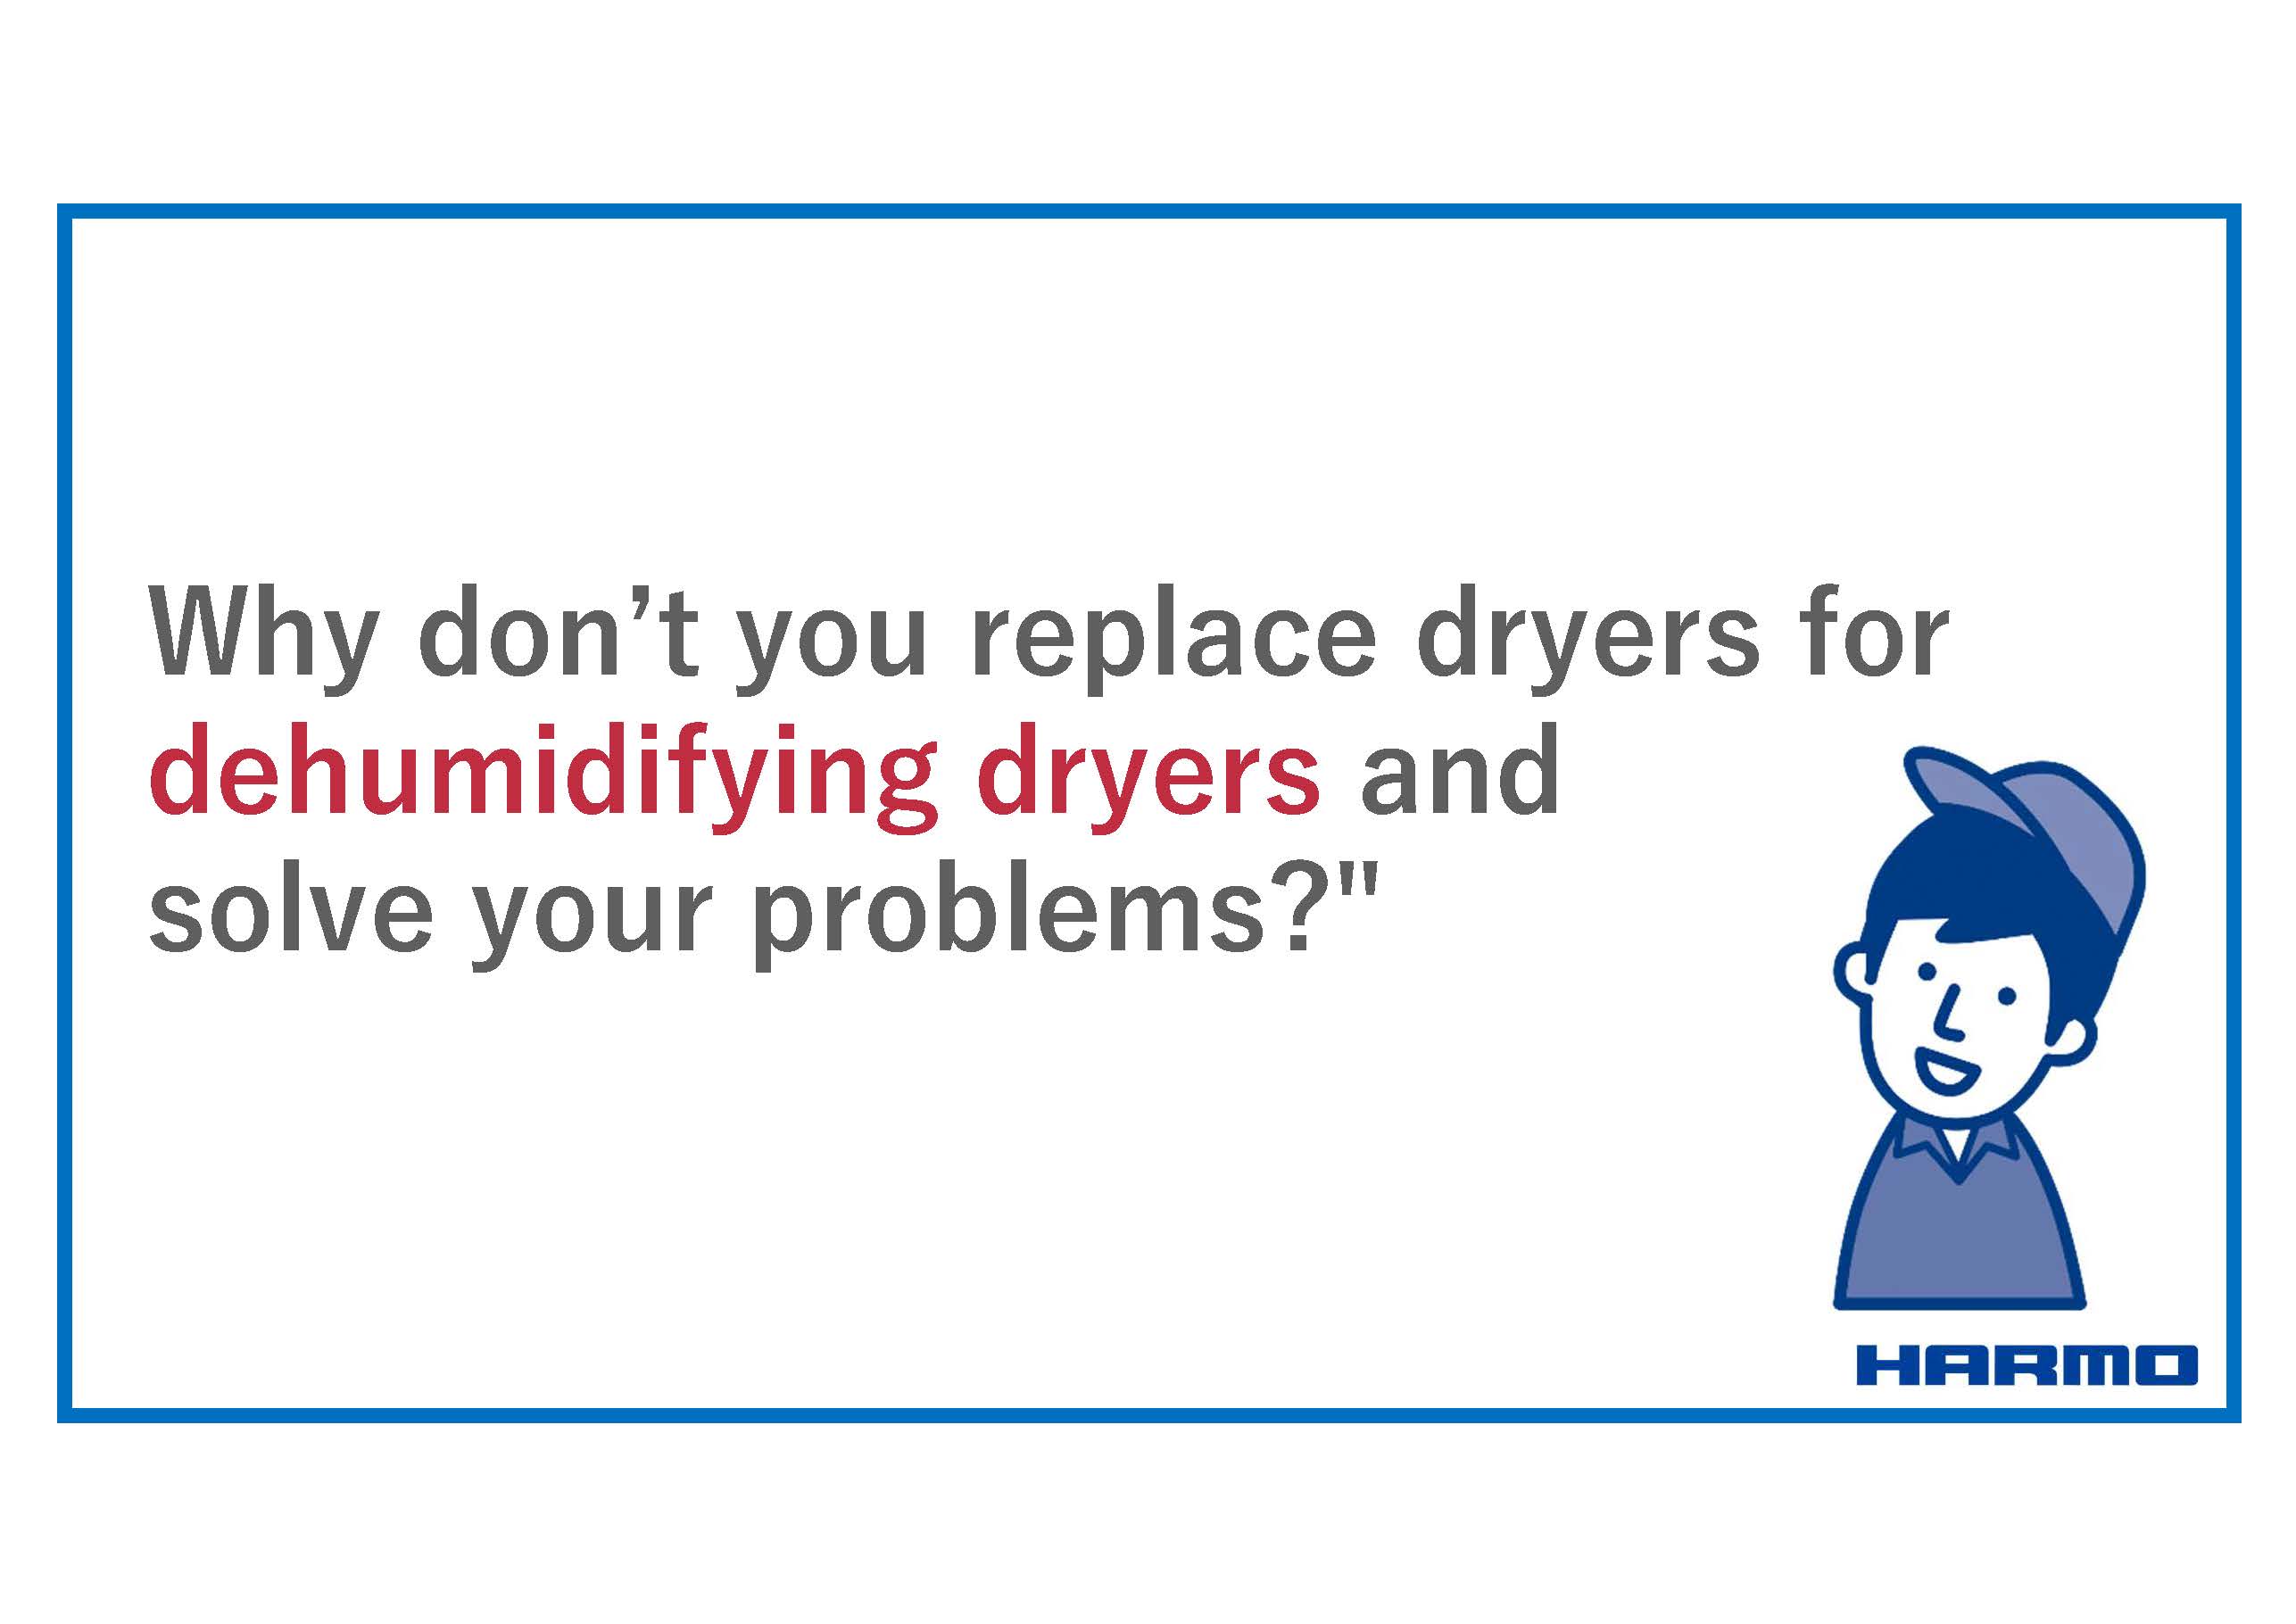 Webinar document｜Why don't you replace dryers for dehumidifying dryers and solve your problems?